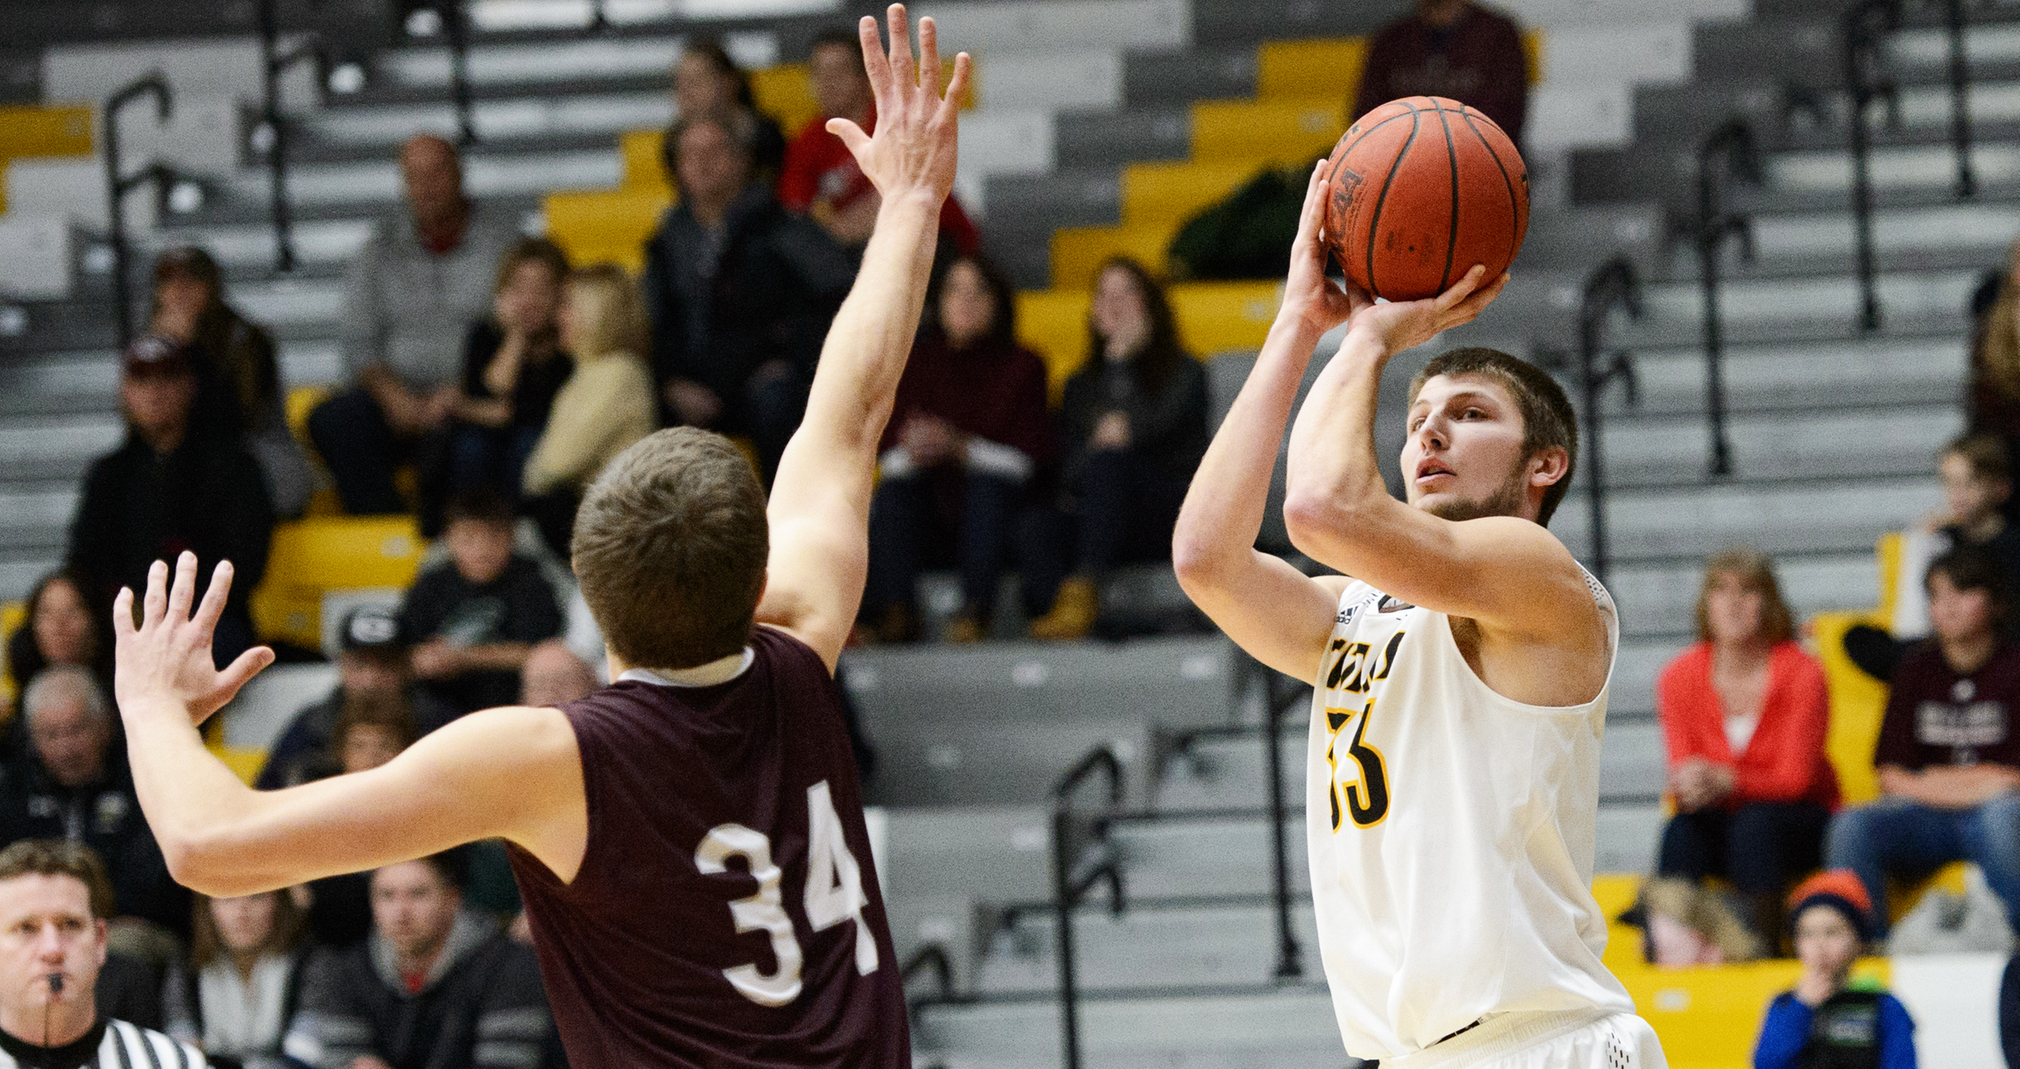 Max Schebel tallied a season-best 12 points and six rebounds against the Eagles.